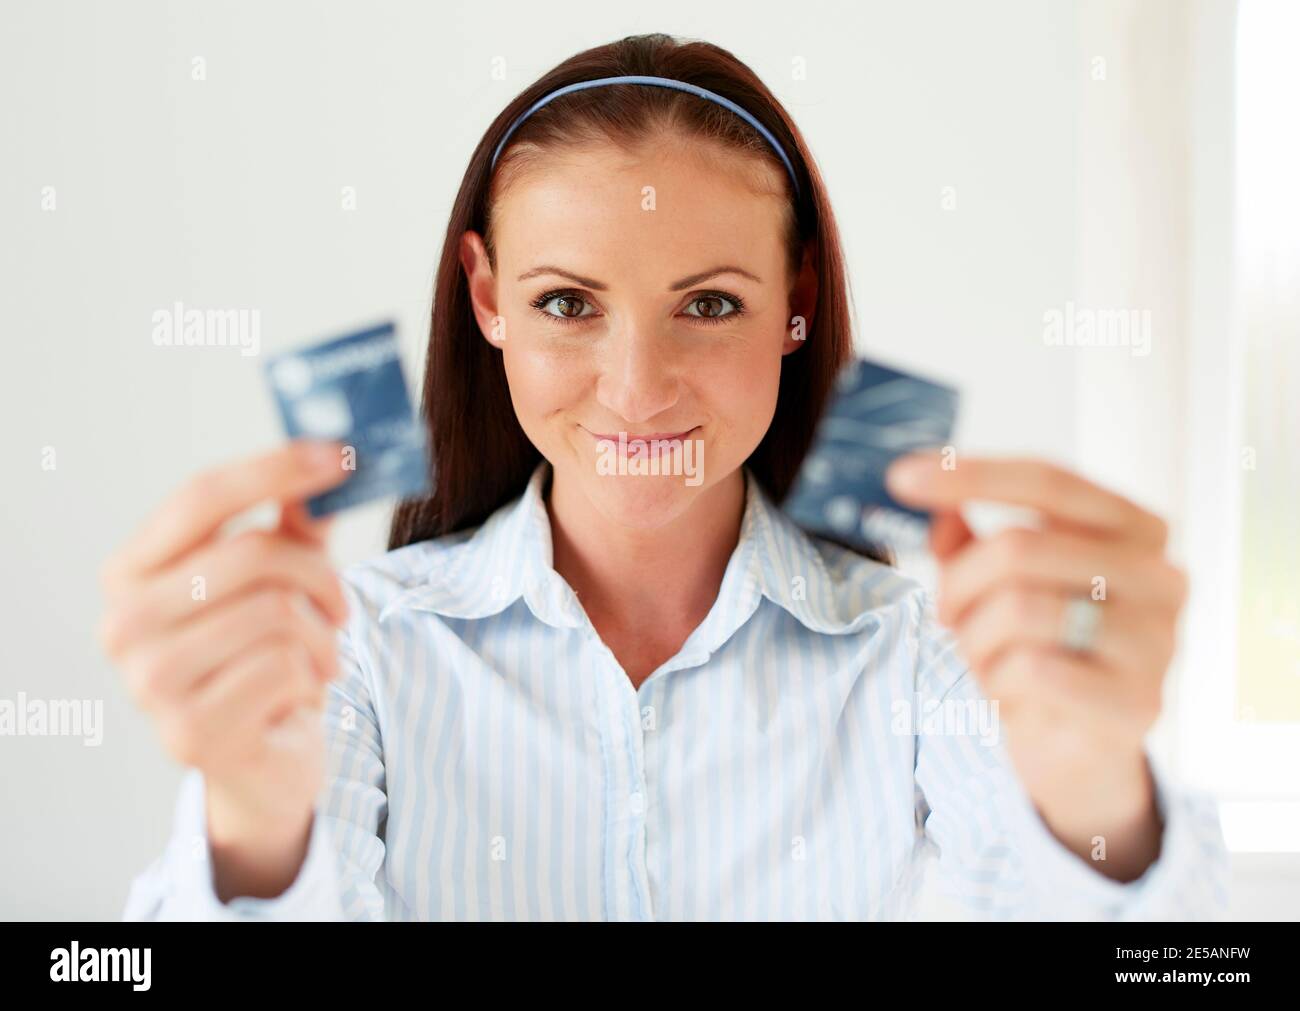 Woman holding credit card cut in half Stock Photo